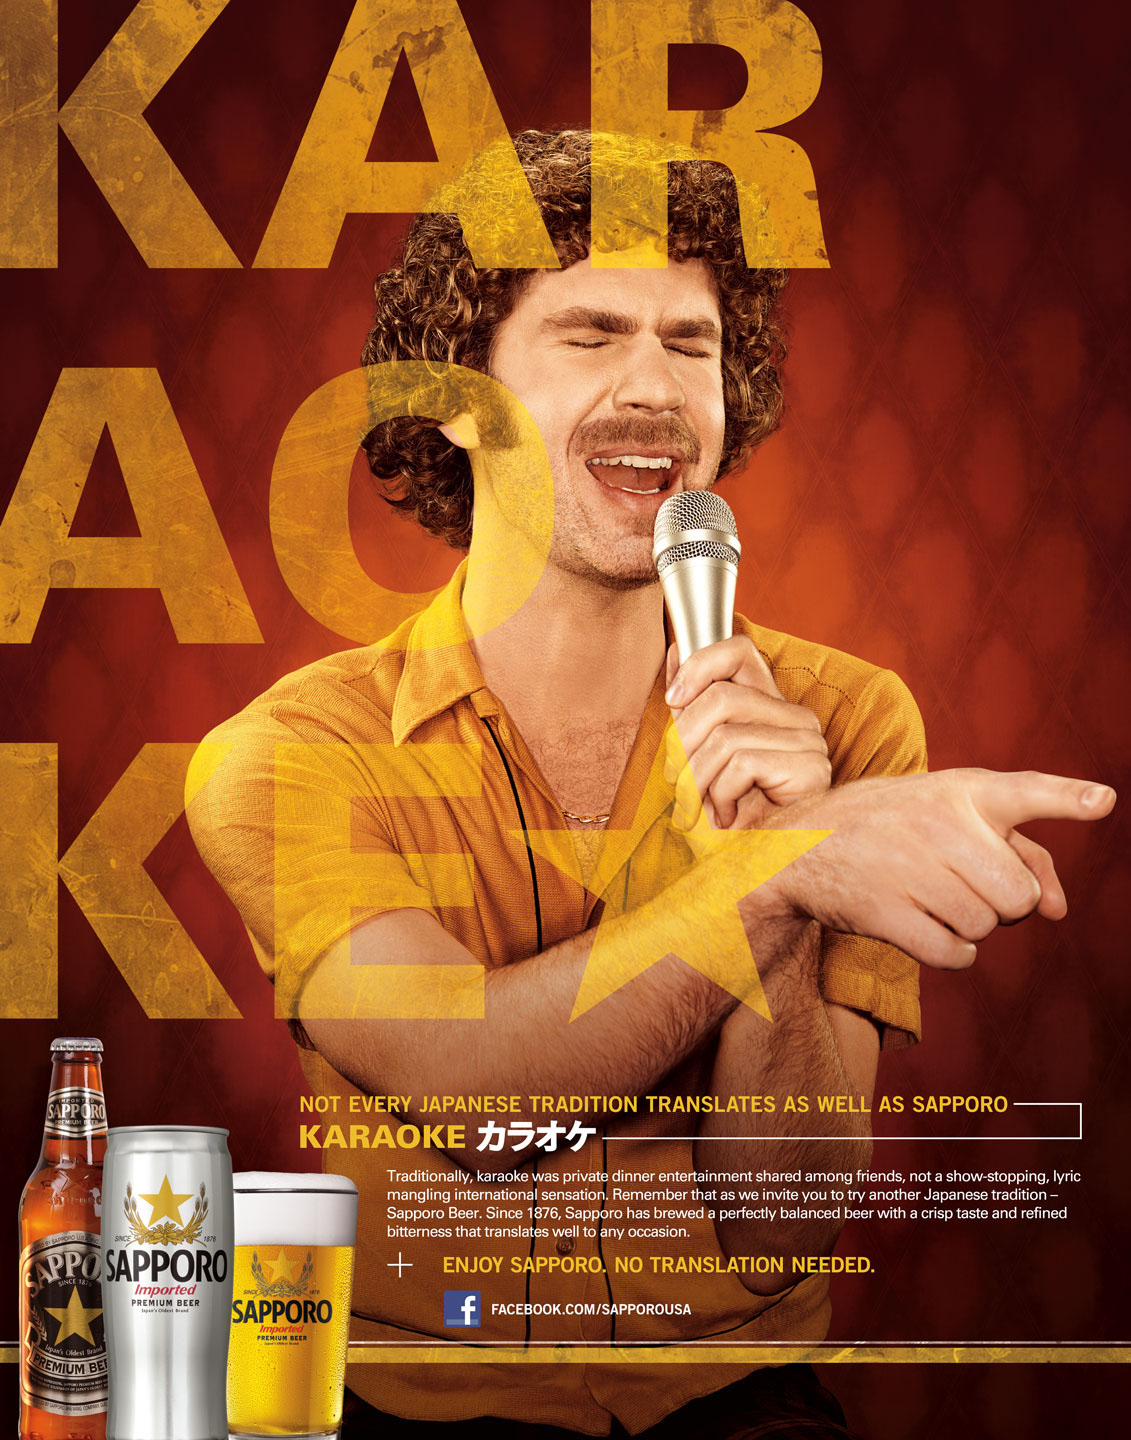 sapporo funny beer ad campaign tradition karaoke wasabi Haiku japanese commercial Advertising 